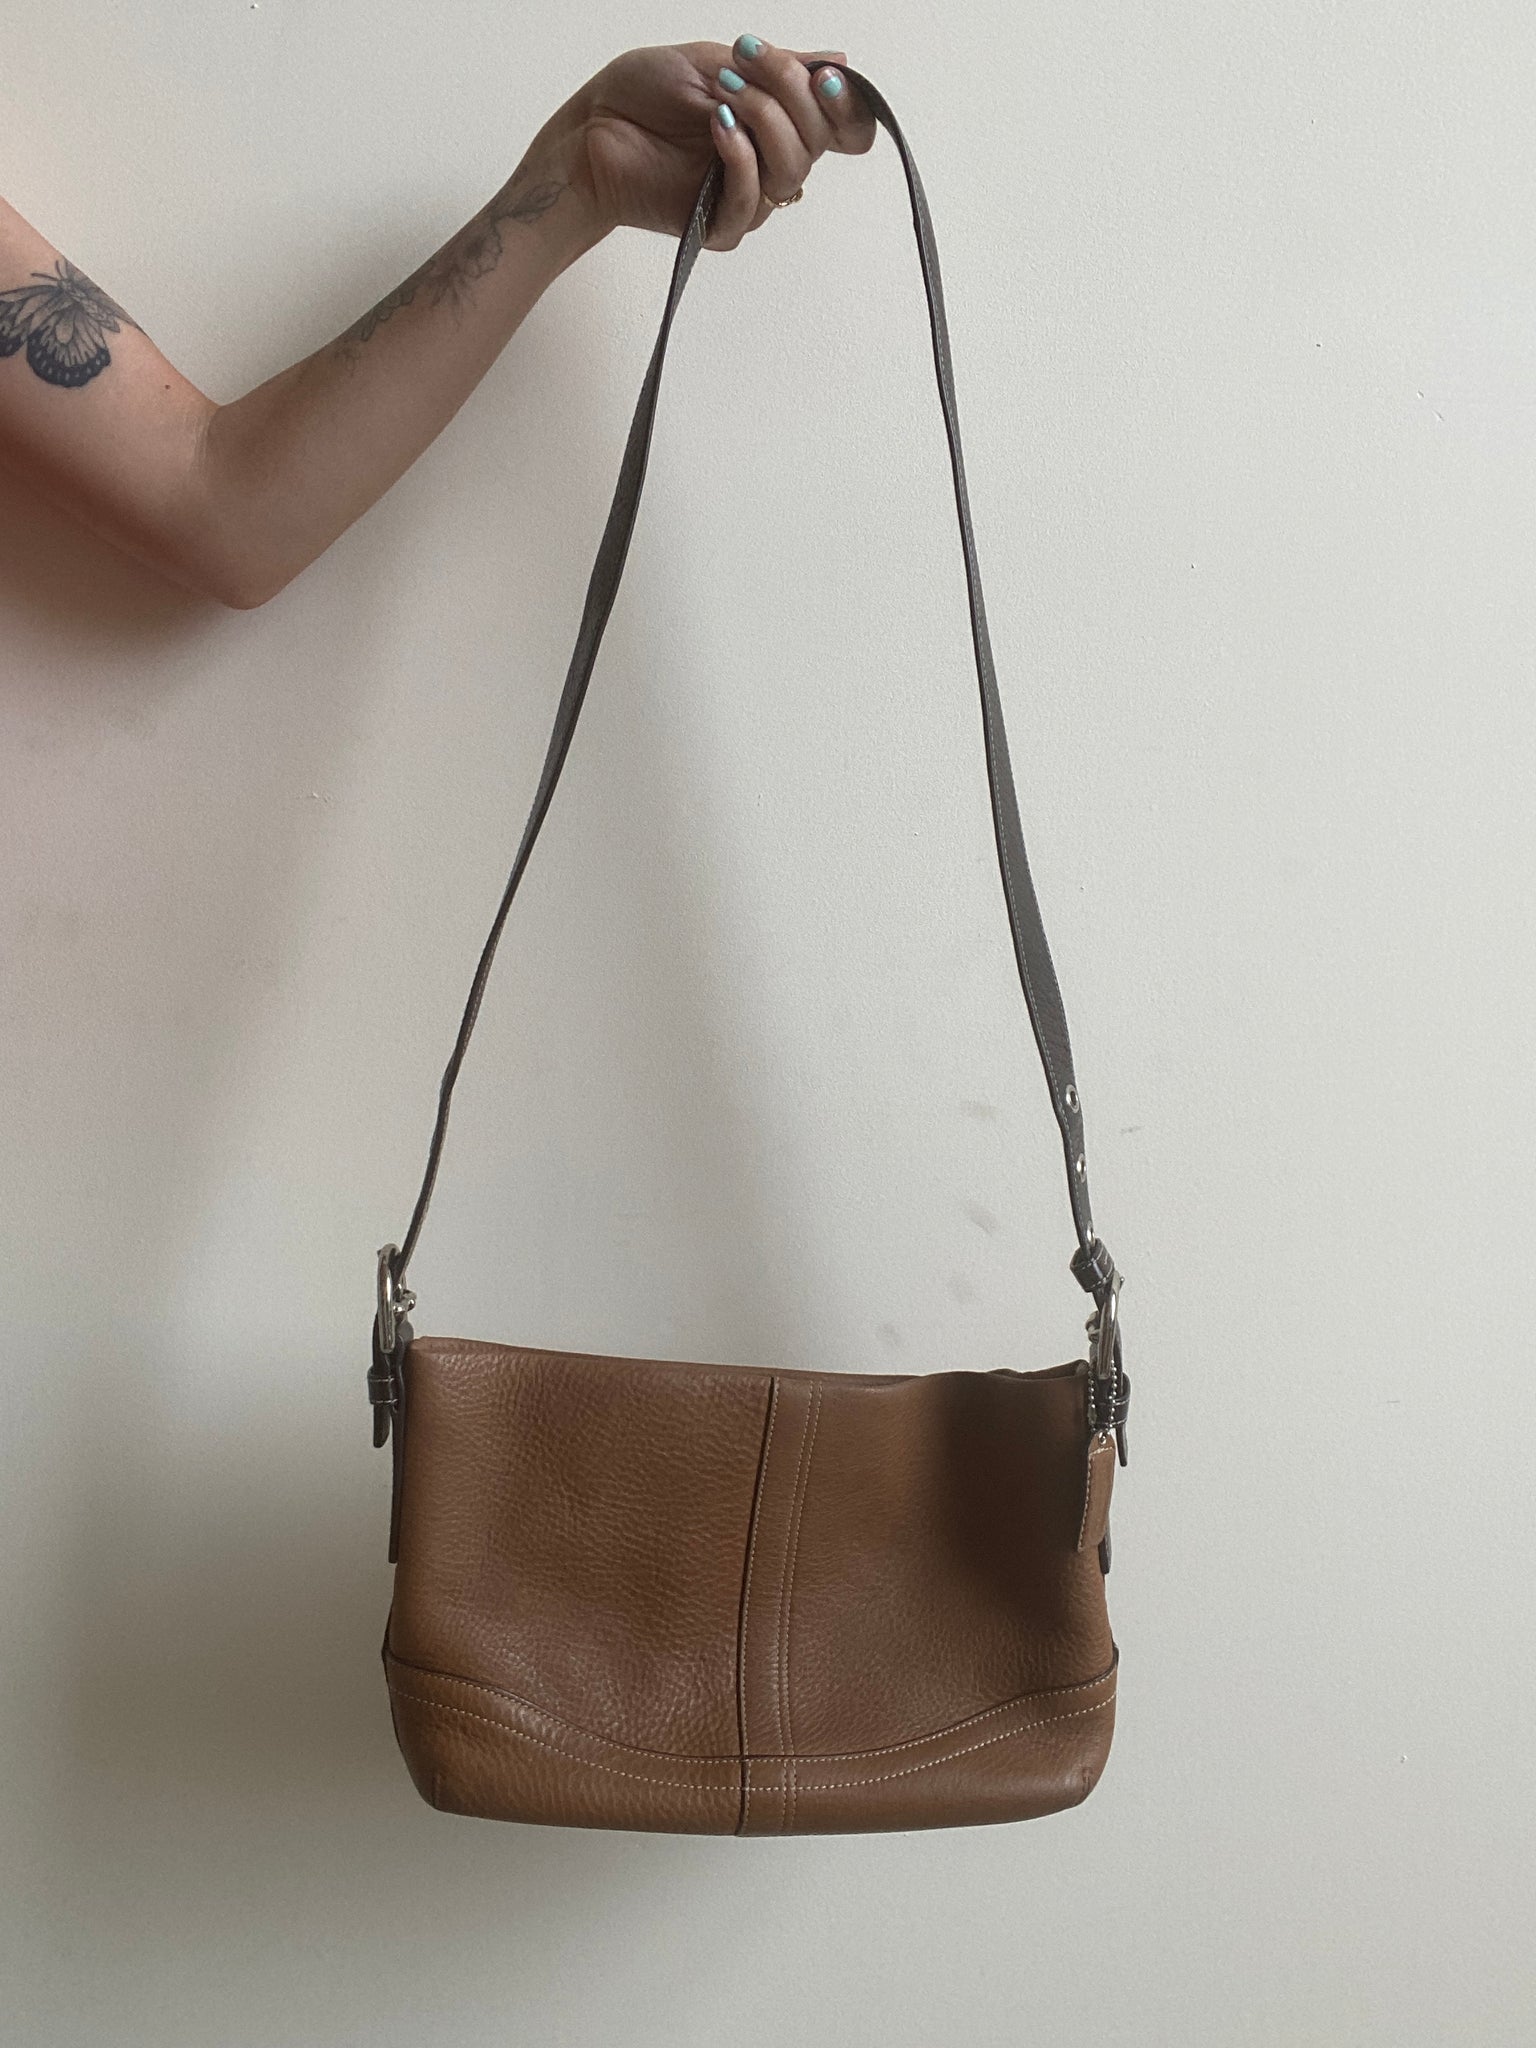 Vintage Coach Two Tone Brown Leather Bag